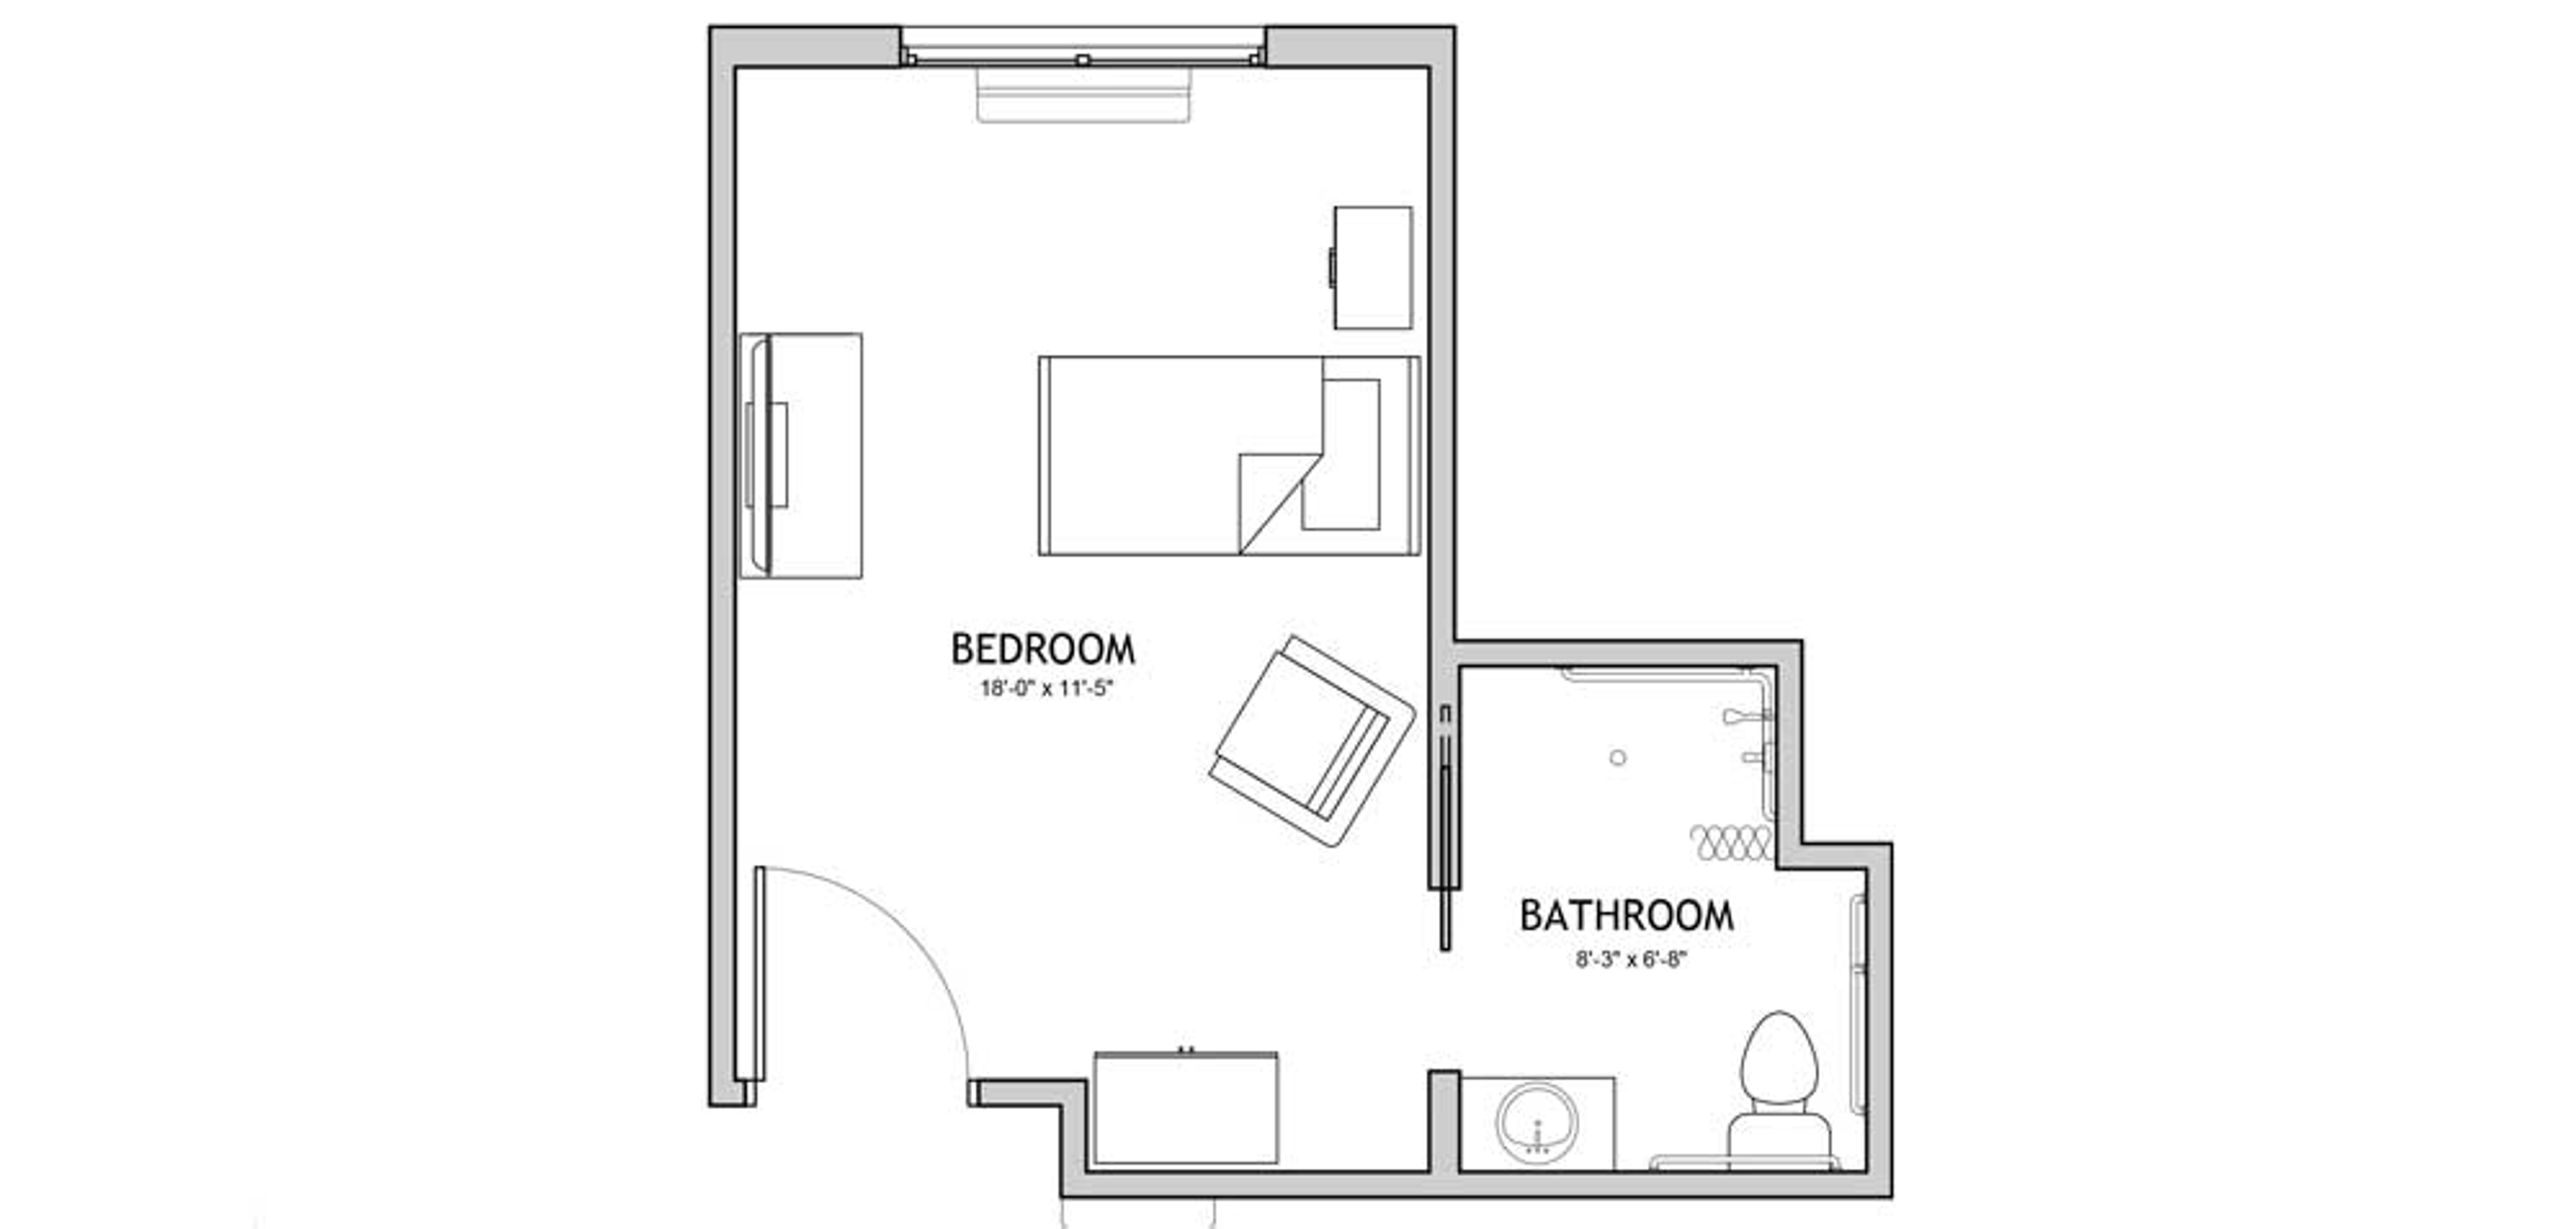 Floorplan - The Auberge at Naperville - 1 bed, 1 bath, 278 sq. ft. Memory Care